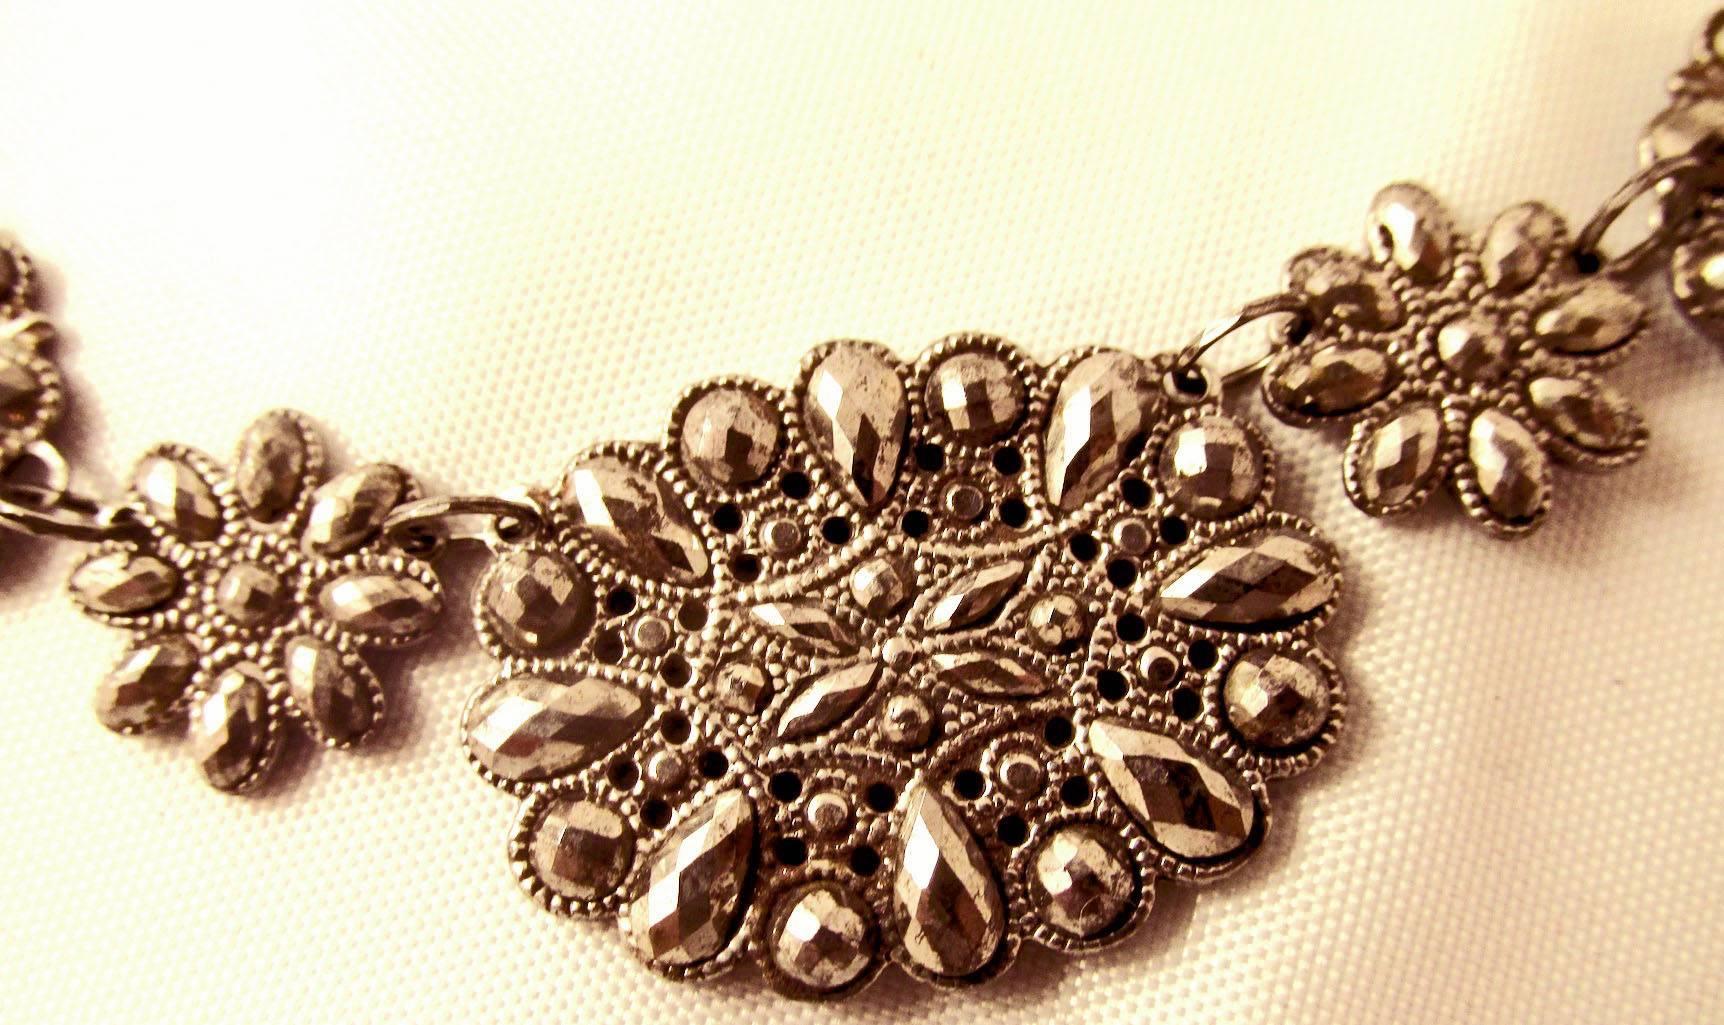 Lovely Georgian early cut steel necklace with a floral motif. Cut steel was popular with the upper classes to wear while traveling. Afraid of highwaymen they left their diamonds safely at home. This piece is beautifully made, take note of the